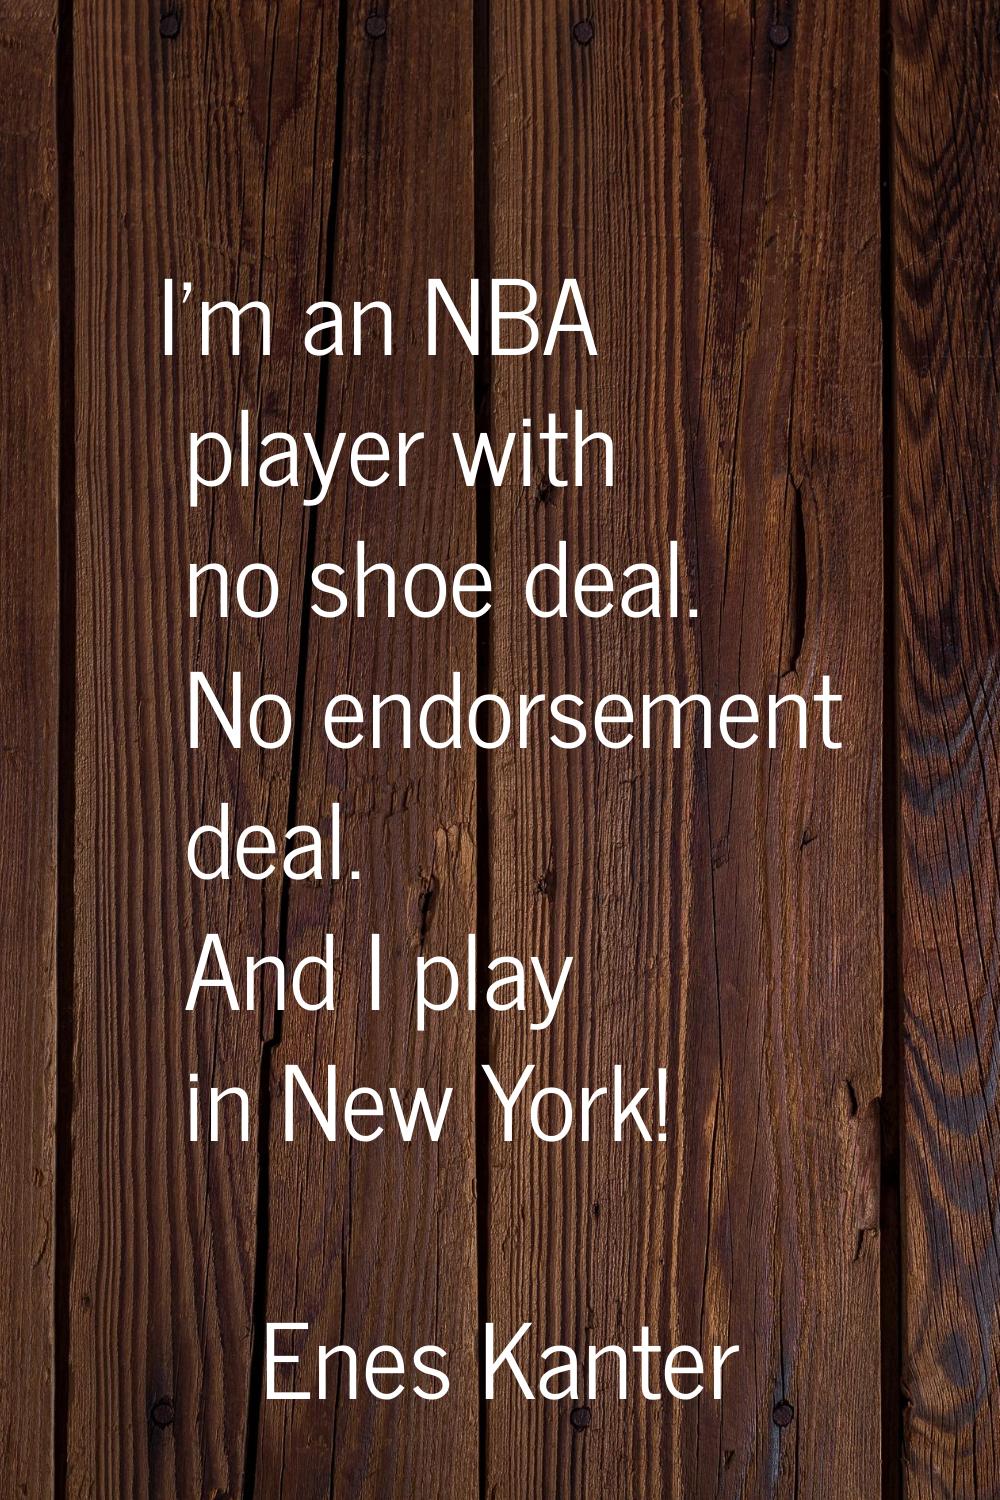 I’m an NBA player with no shoe deal. No endorsement deal. And I play in New York!